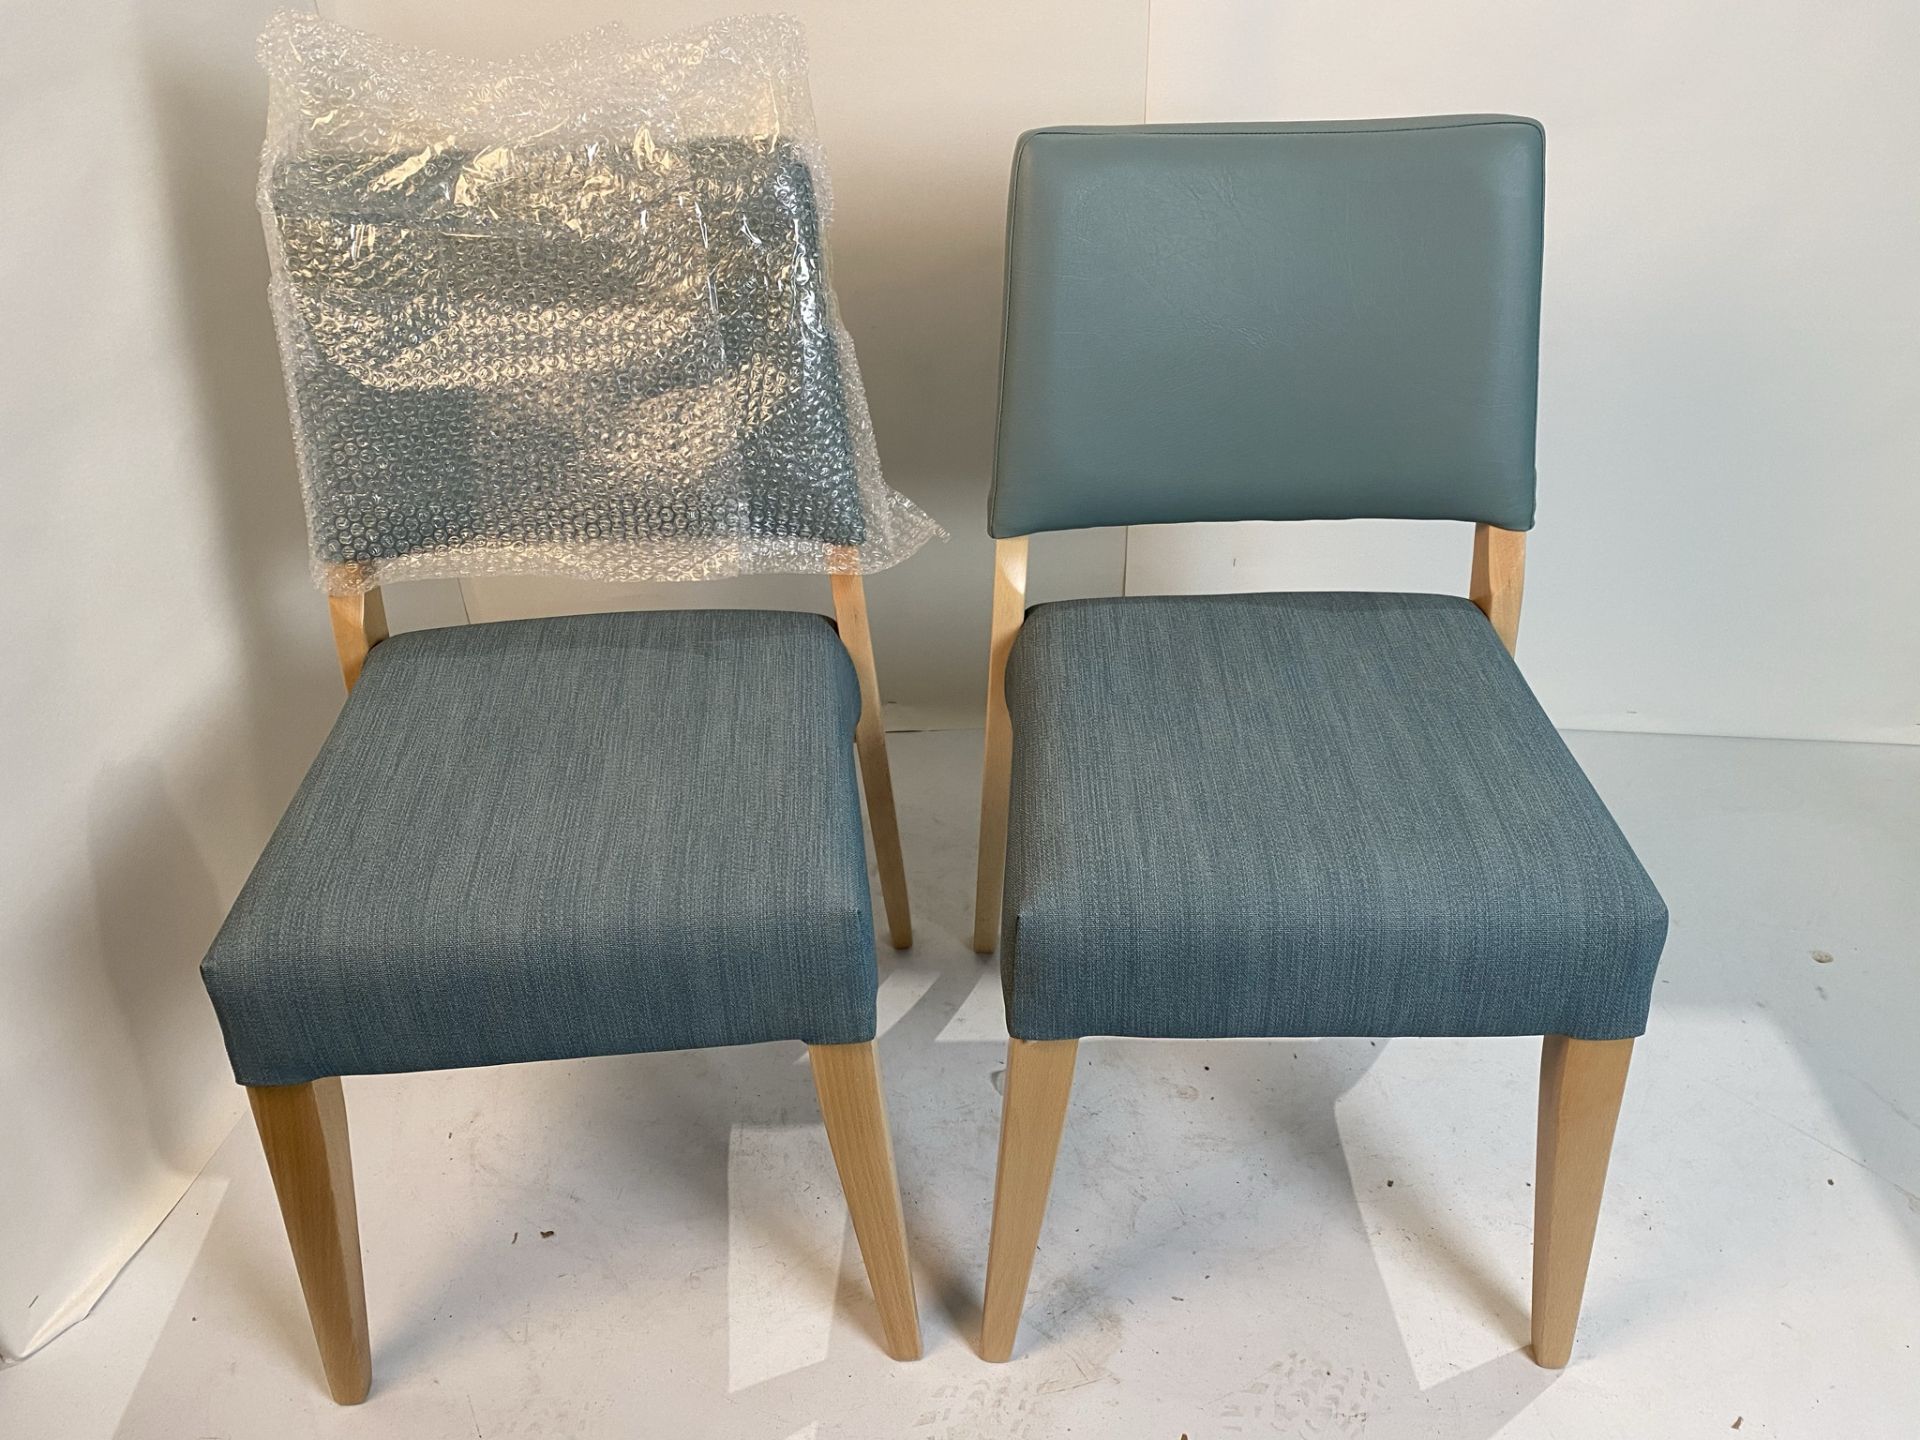 2 x Reuben side chairs with B. - Image 2 of 6